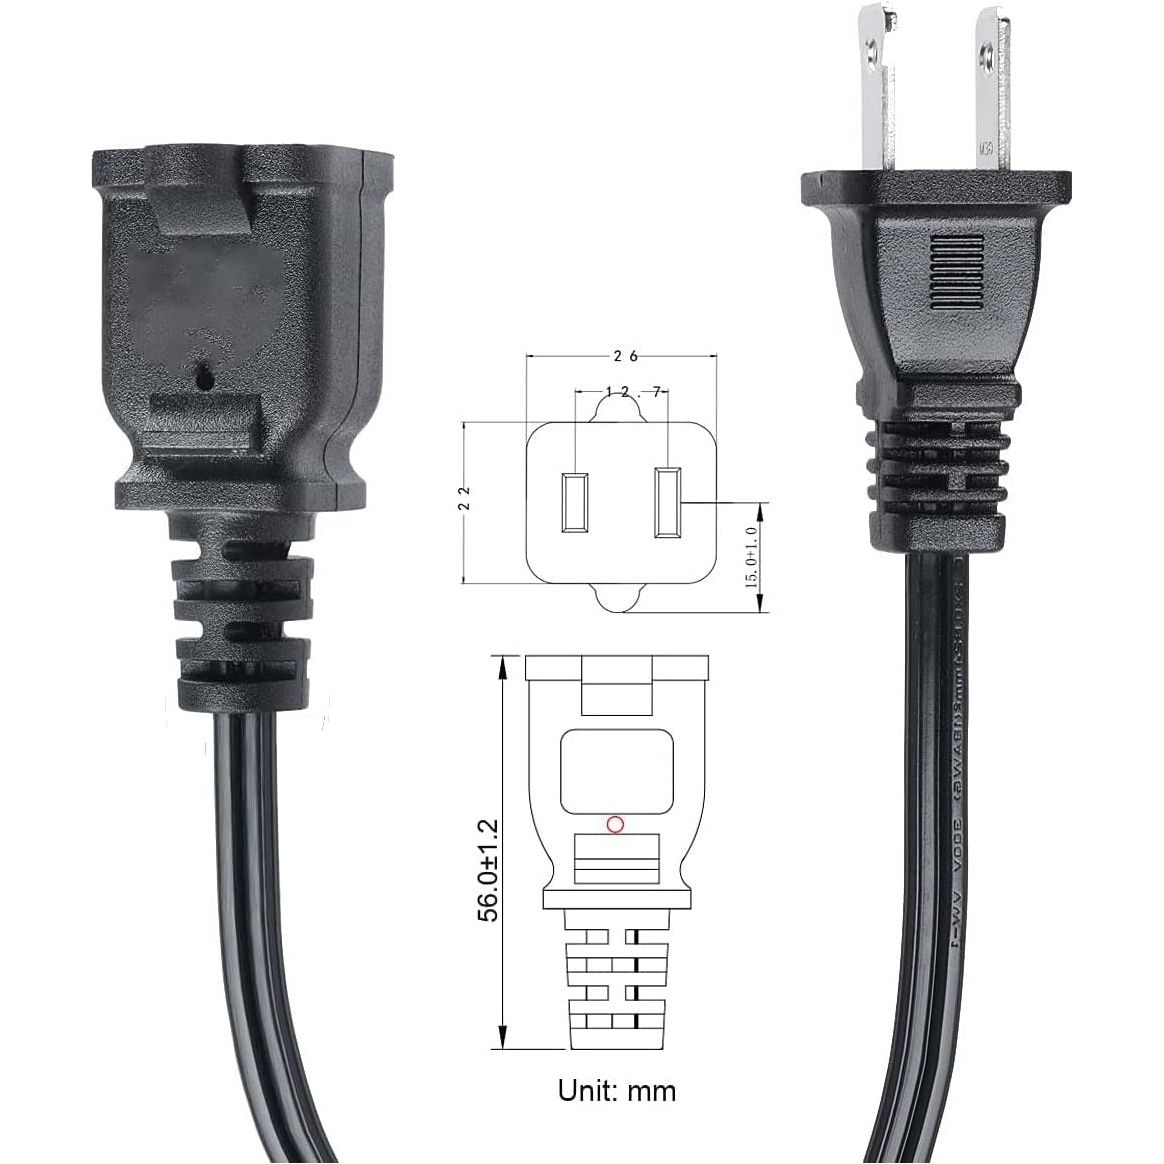 2-Prong Male-Female Extension Power Cord Cable; Outlet Extension Cable Cord US AC 2-Prong Male-Female Power Cable 13A/125V; Black 5 Core EXC BLK 15FT Moorescarts